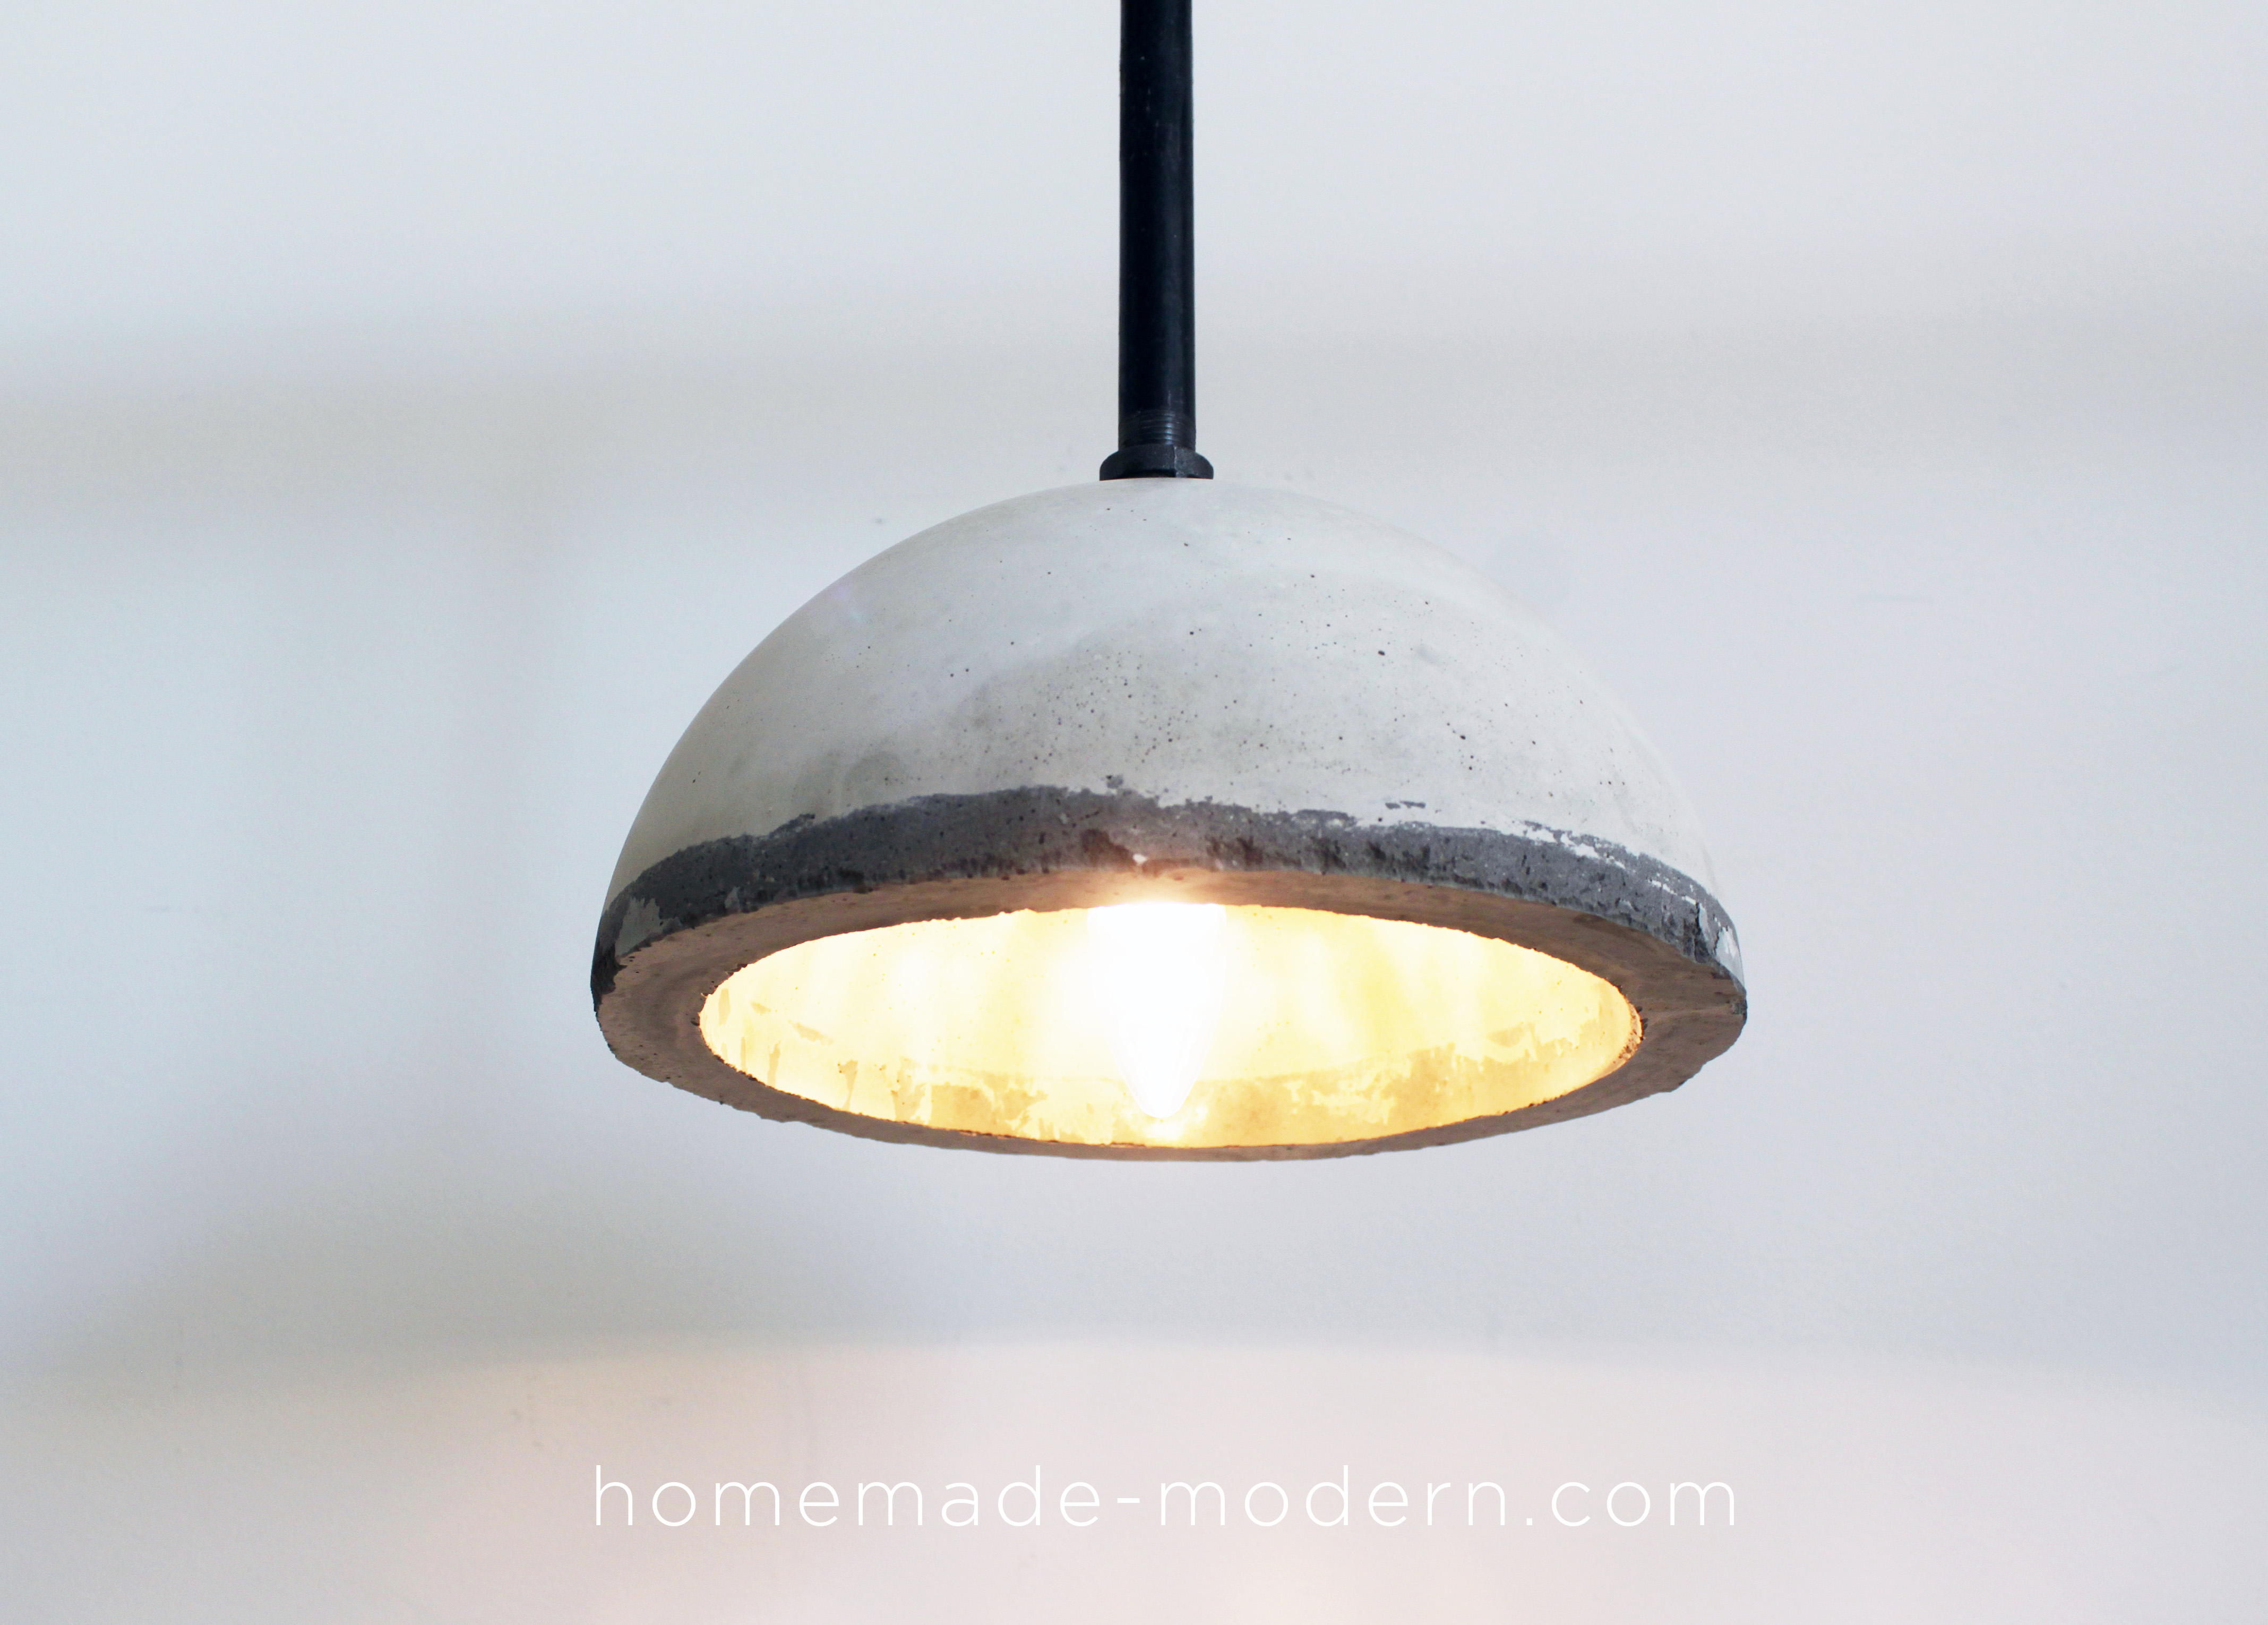 These DIY concrete lamps are easy and affordable to make. For more information go to HomeMade-Modern.com